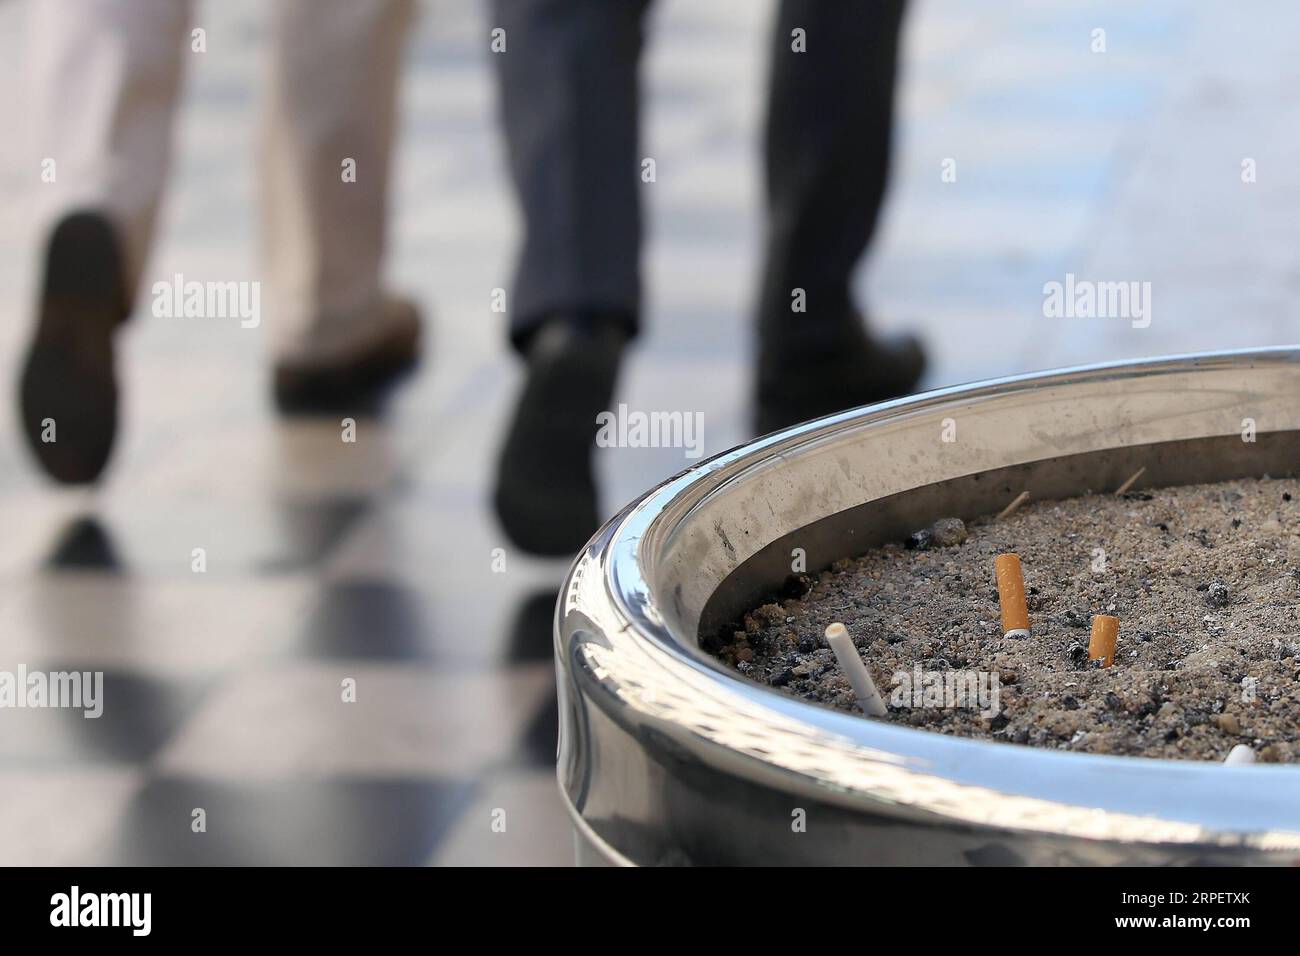 (190904) -- LISBON, Sept. 4, 2019 -- Cigarette butts are seen in a public ashtray on the sidewalk of a street in Lisbon, Portugal, on Sept. 4, 2019. Portugal introduced on Wednesday a strict law aiming at combating smokers who throw the cigarette butts on the ground in public. The new law that approves measures for the collection and treatment of the tobacco waste enters into force on Wednesday. Whoever throws on the floor will be punished with fines between 25 and 250 euros (27.6 U.S. dollars to 276 U.S. dollars). (Photo by Pedro Fiuza/Xinhua) PORTUGAL-LISBON-LAW-CIGARETTE BUTTS THROWER Petro Stock Photo